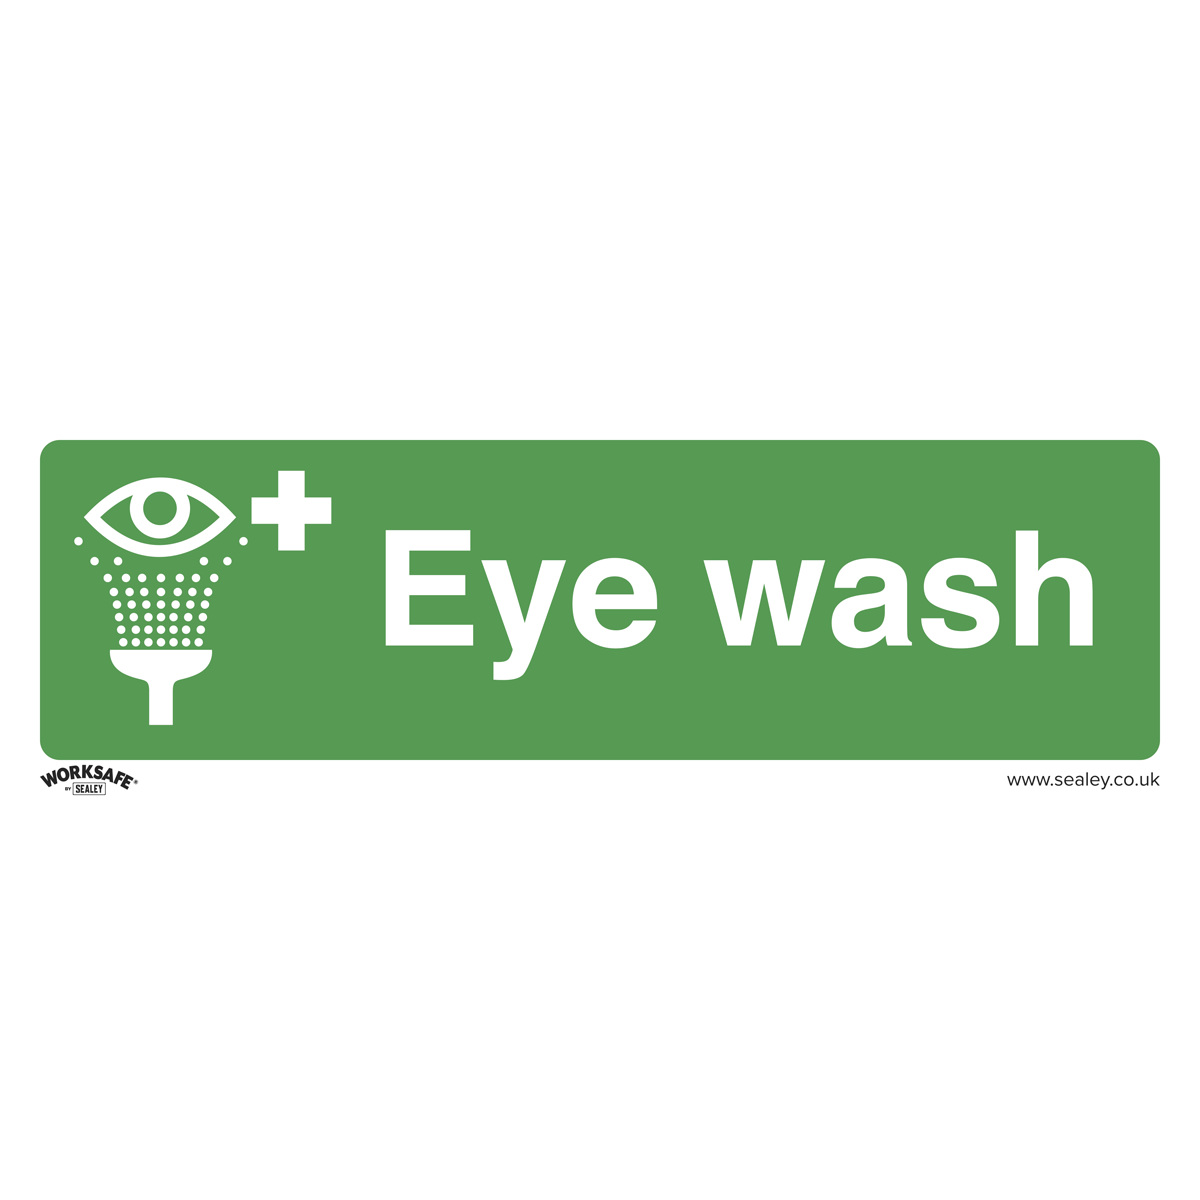 Safe Conditions Safety Sign - Eye Wash - Self-Adhesive Vinyl - SS58V1 - Farming Parts